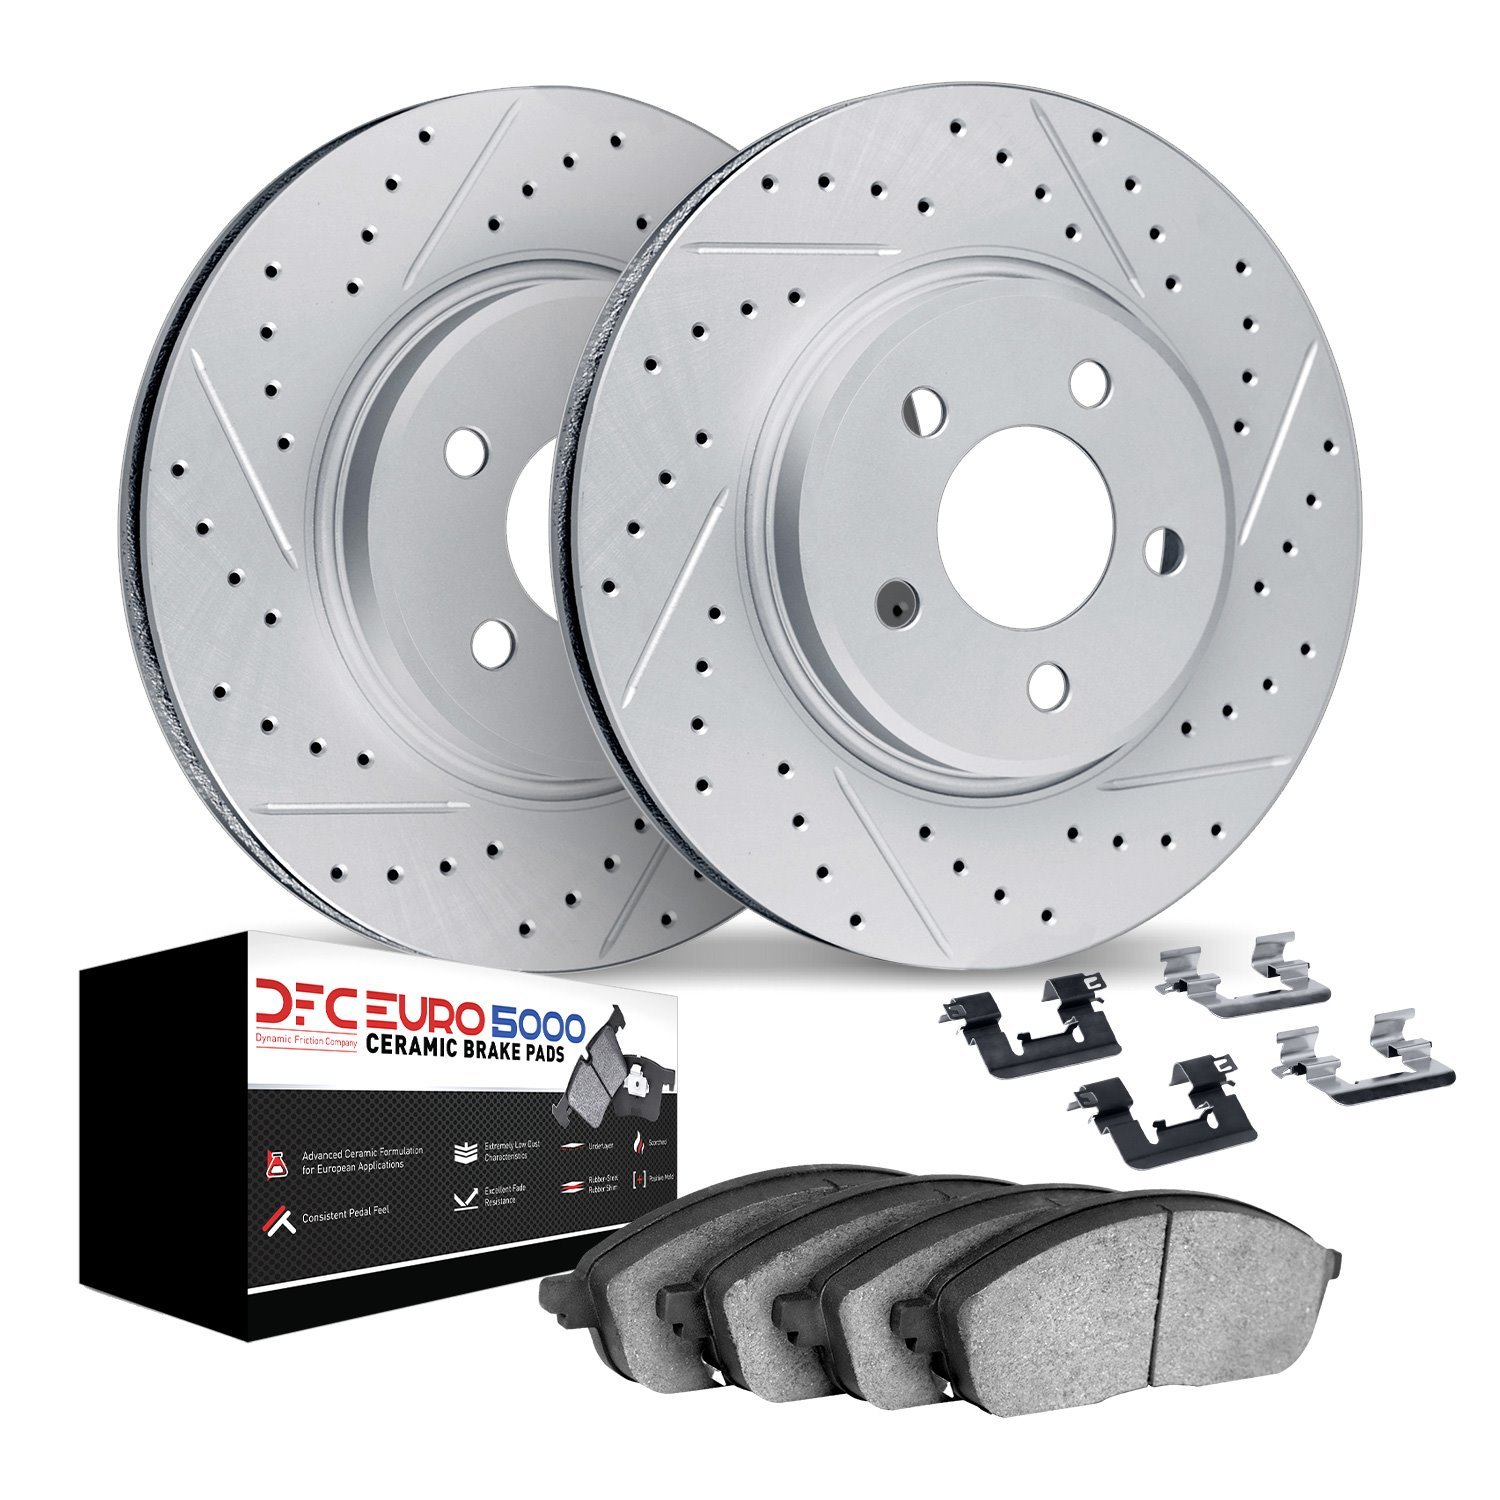 2612-39000 Geoperformance Drilled/Slotted Rotors w/5000 Euro Ceramic Brake Pads Kit & Hardware, Fits Select Mopar, Position: Fro